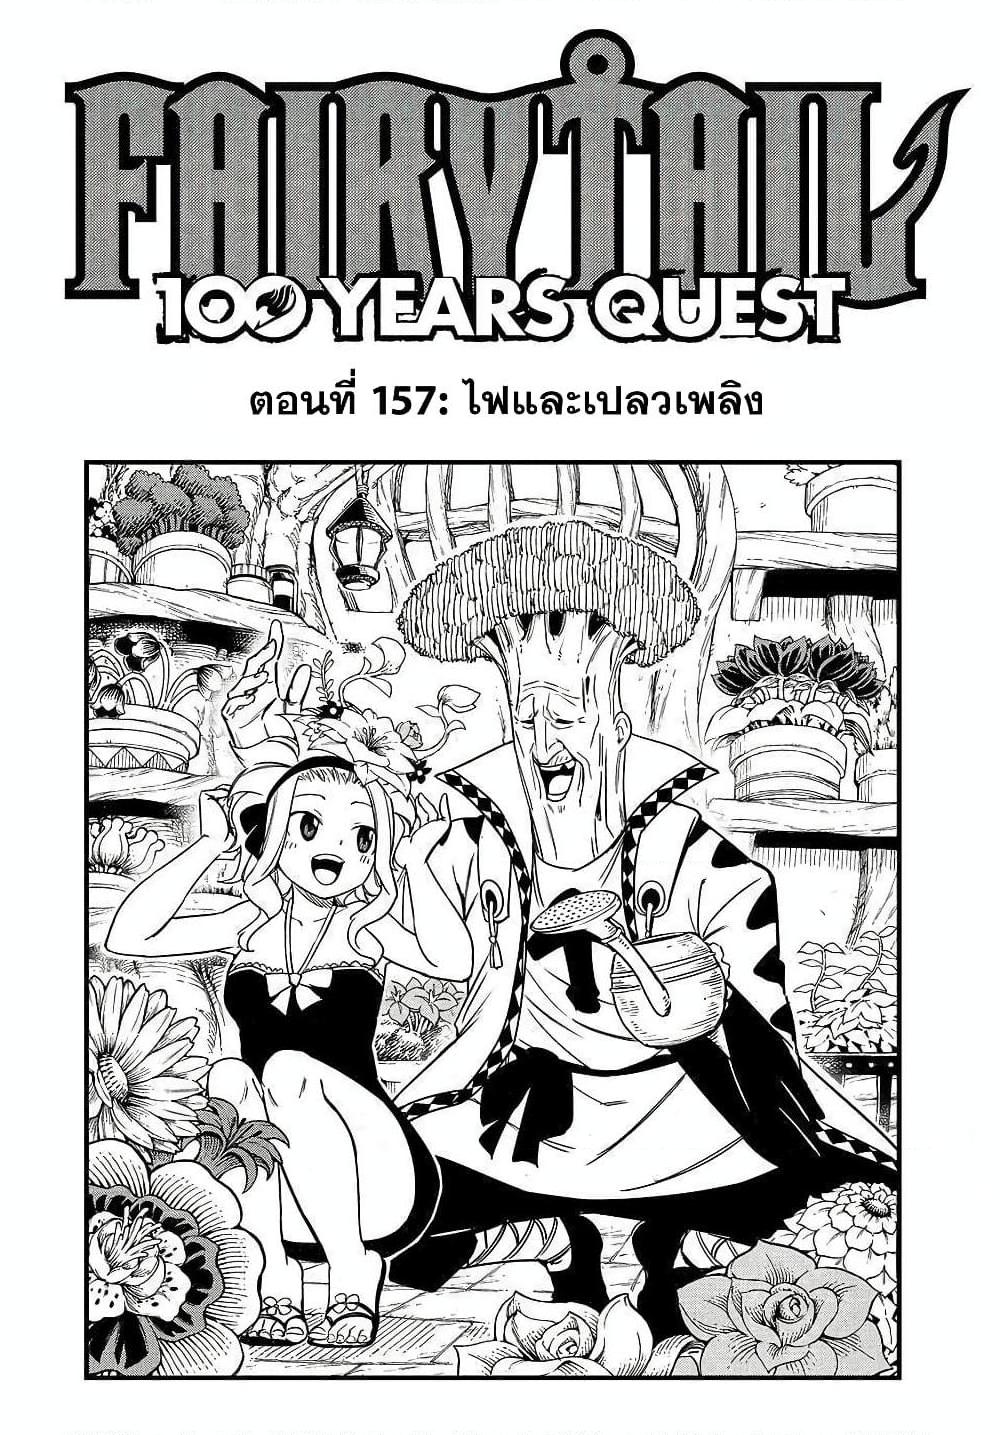 Fairy Tail 100 Years Quest ตอนที่ 157 (1)